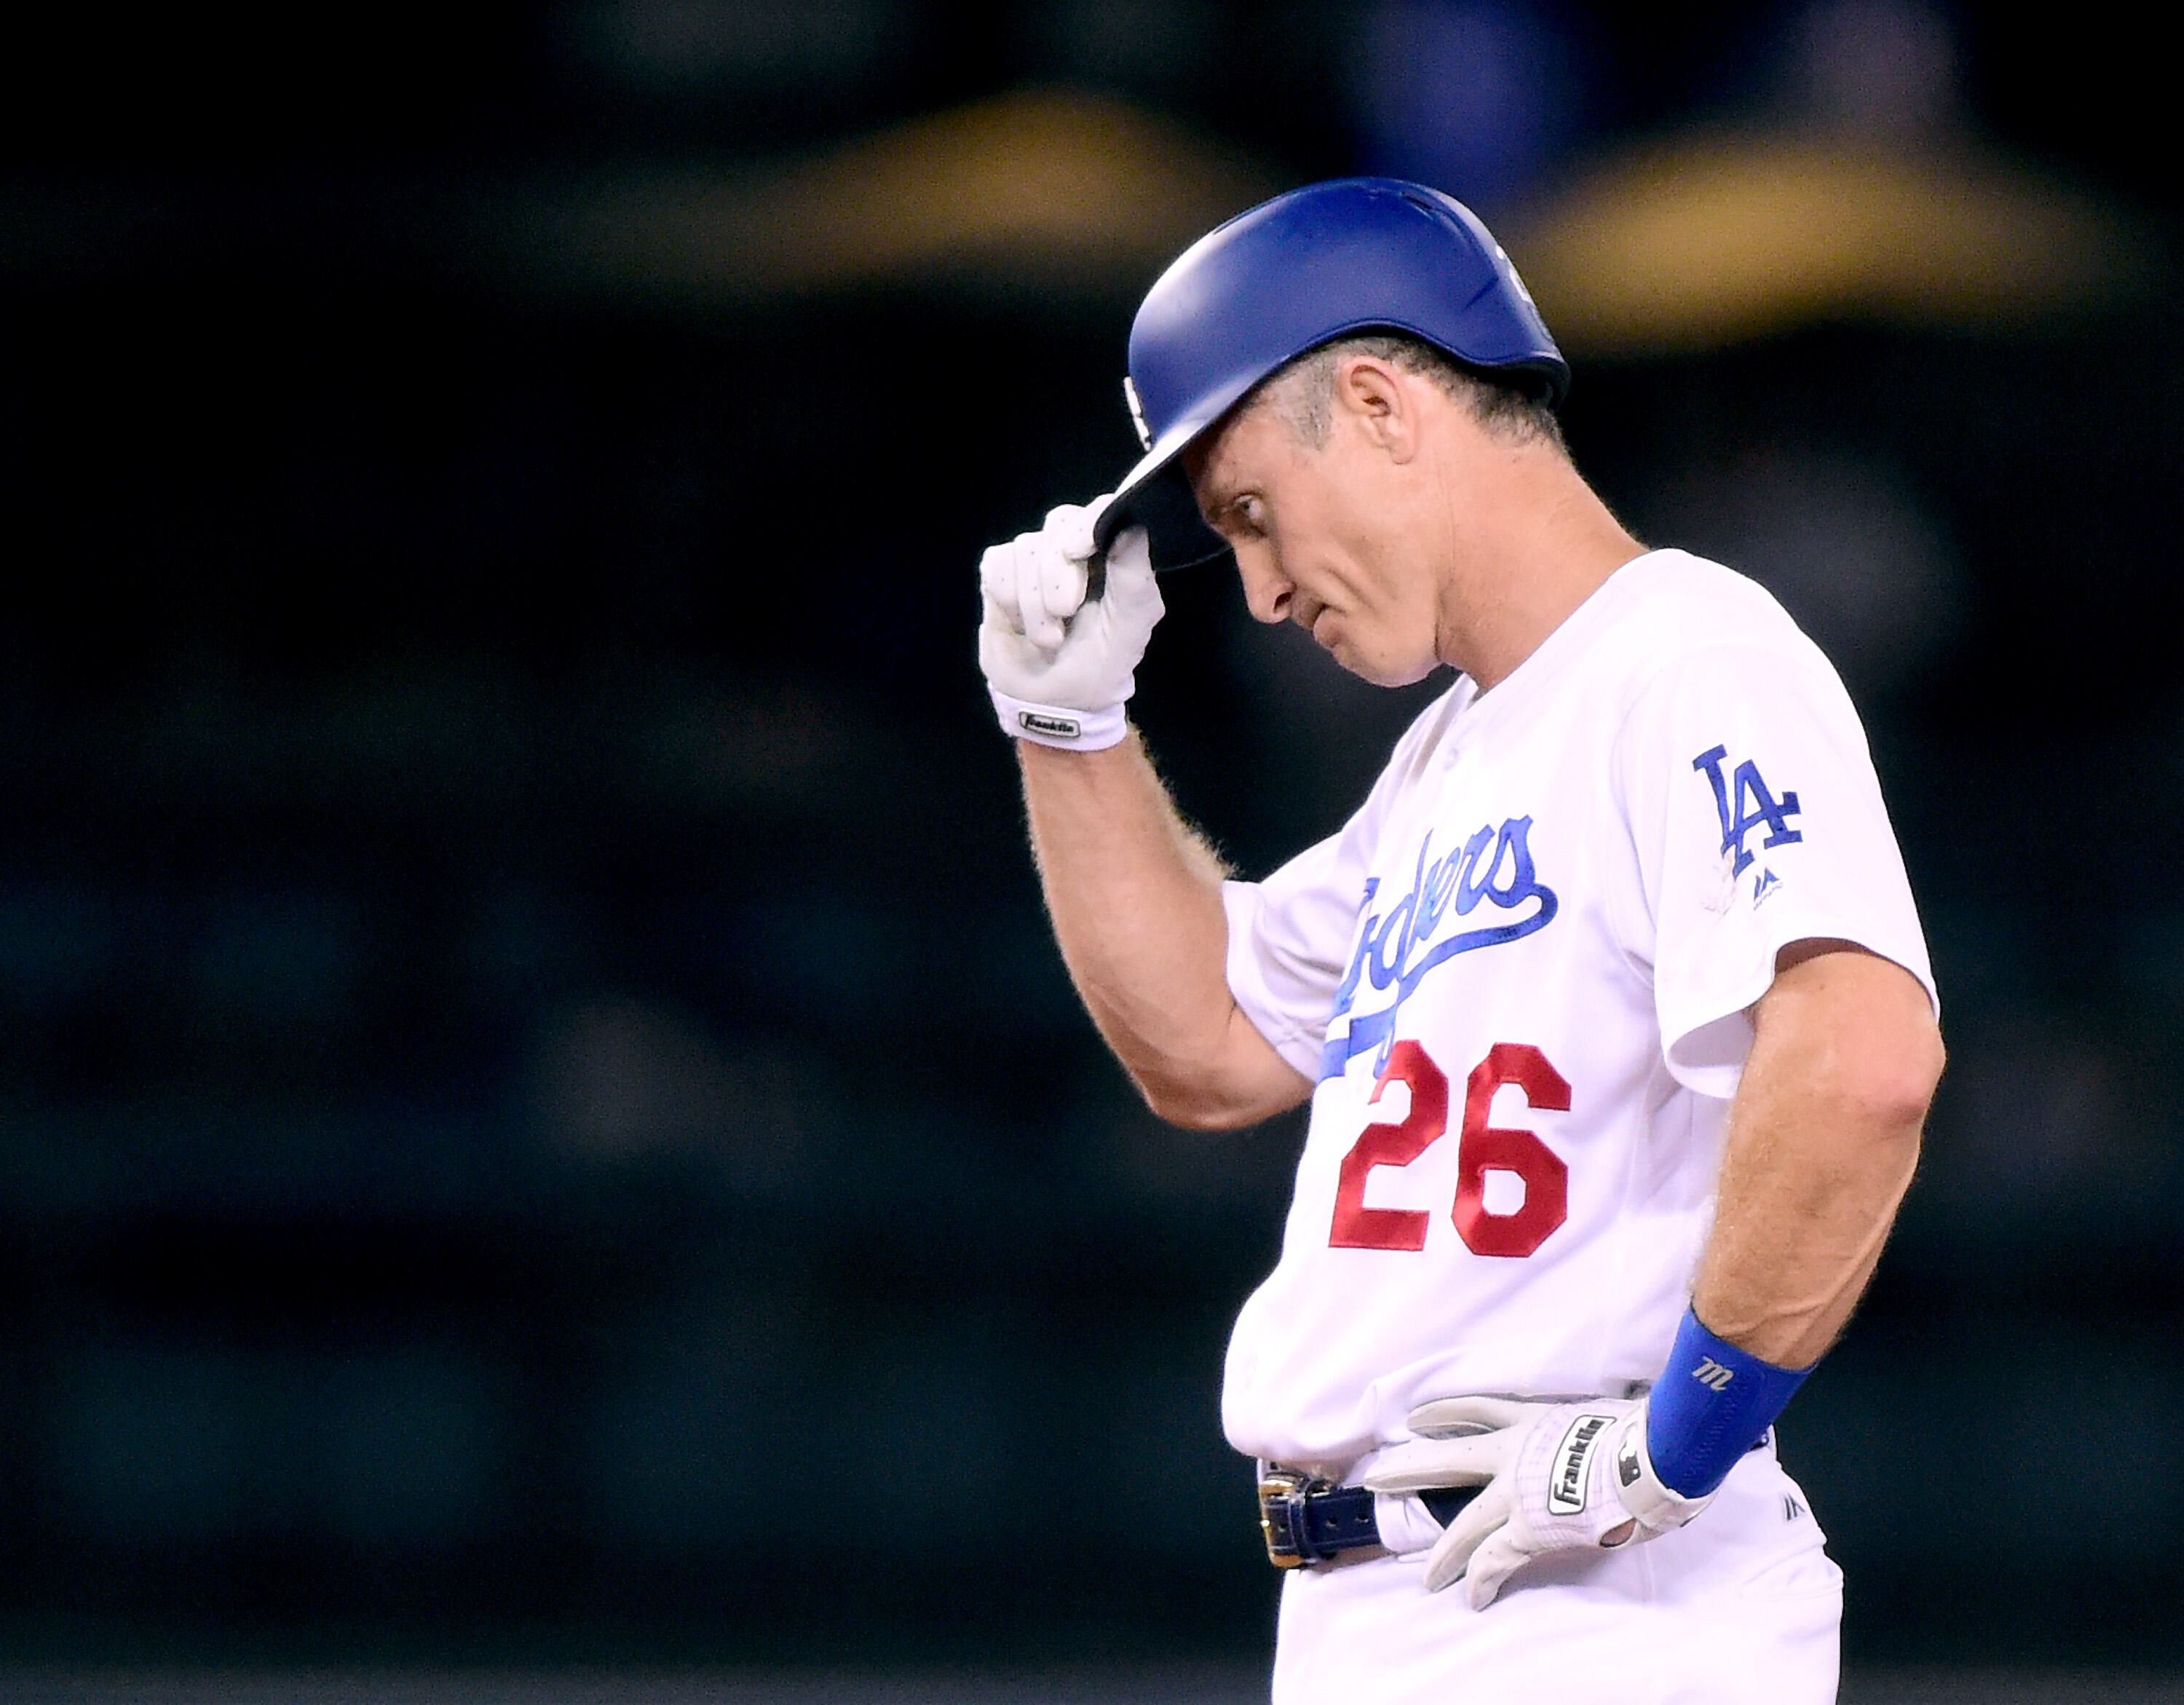 LOS ANGELES, CA - JULY 07:  Chase Utley #26 of the Los Angeles Dodgers reacts to applause from the crowd for his 1000th RBI after driving in Joc Pederson #31 with a double to take a 4-1 lead over the Kansas City Royals during the eighth inning at Dodger S